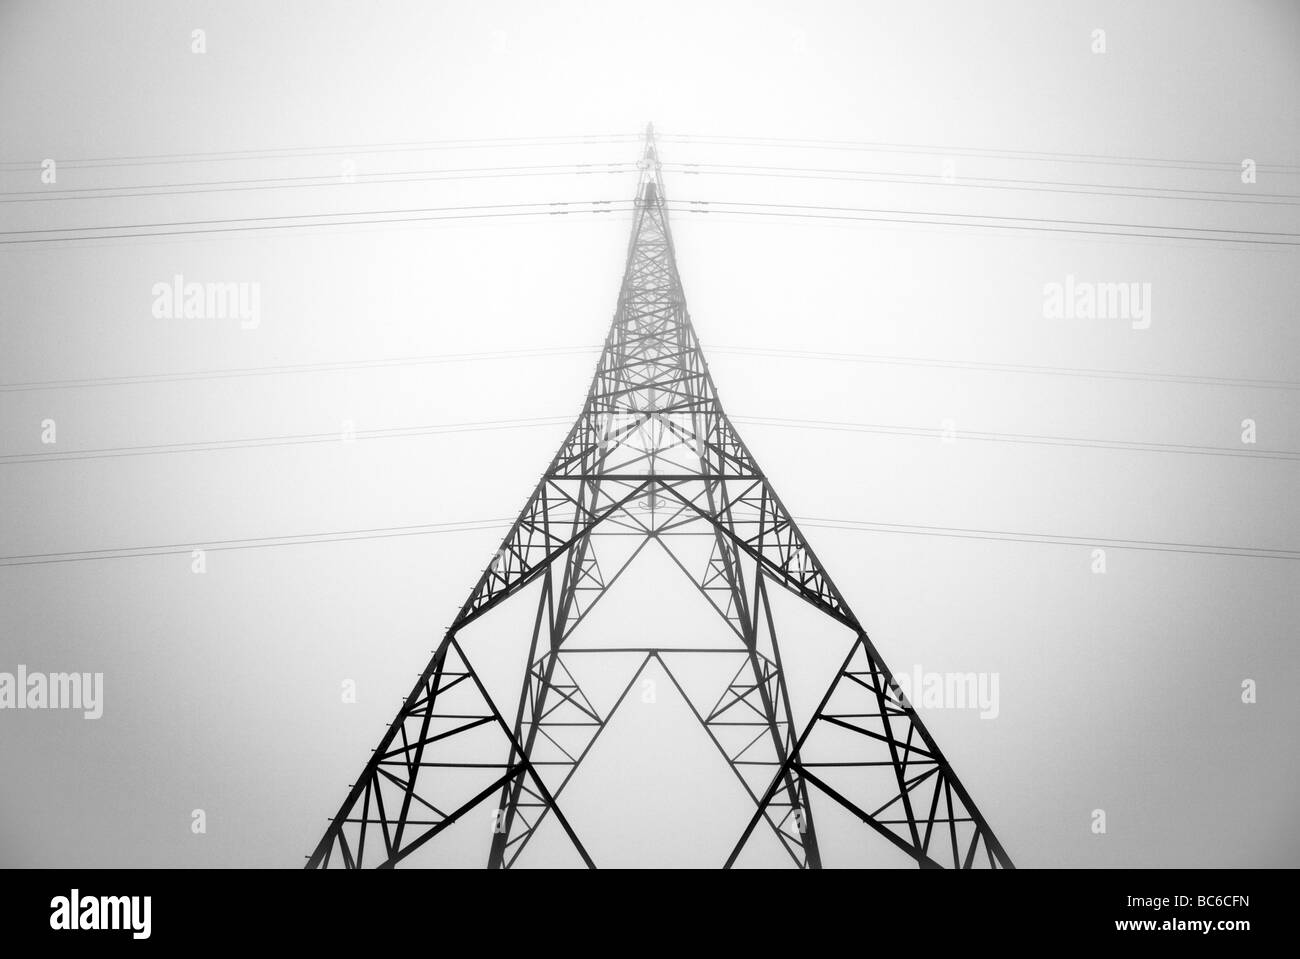 Looking up at an electricity pylon through the mist Stock Photo